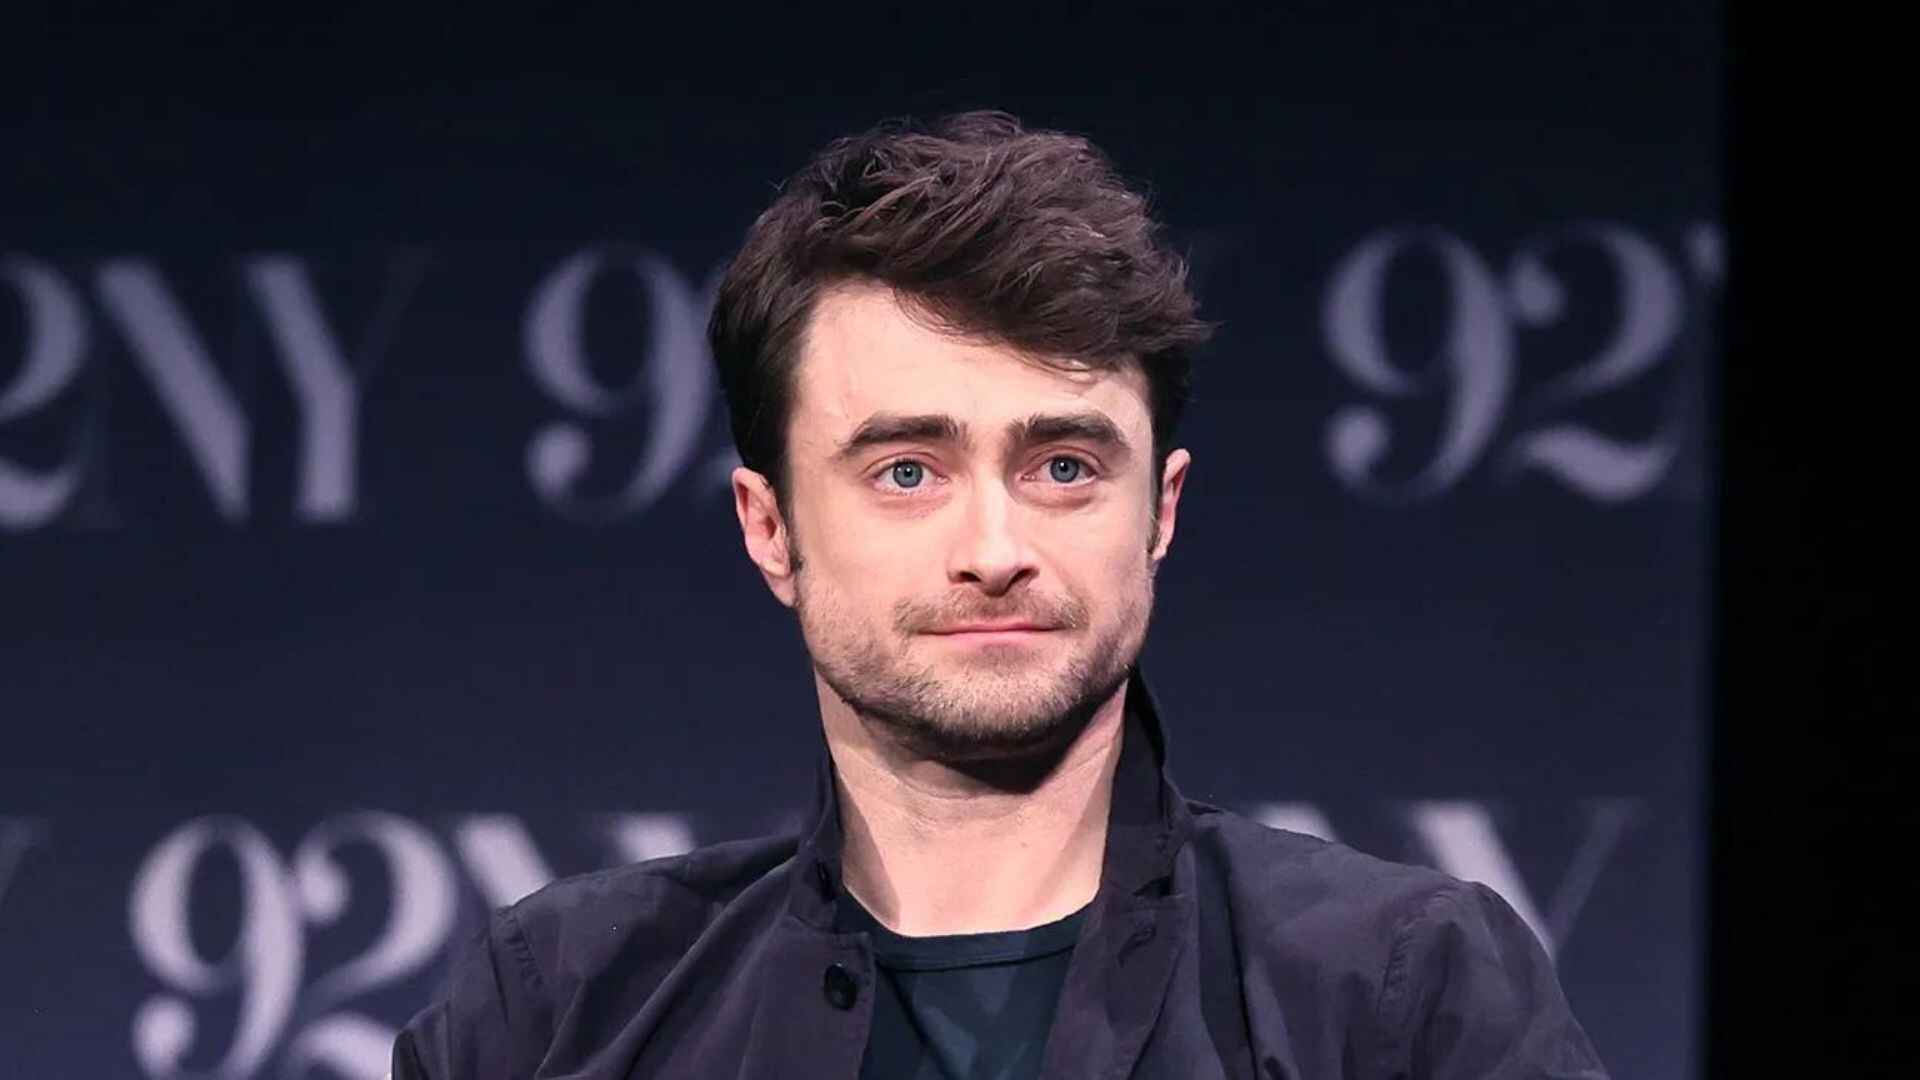 Daniel Radcliffe Disheartened By JK Rowling’s Trans Comments